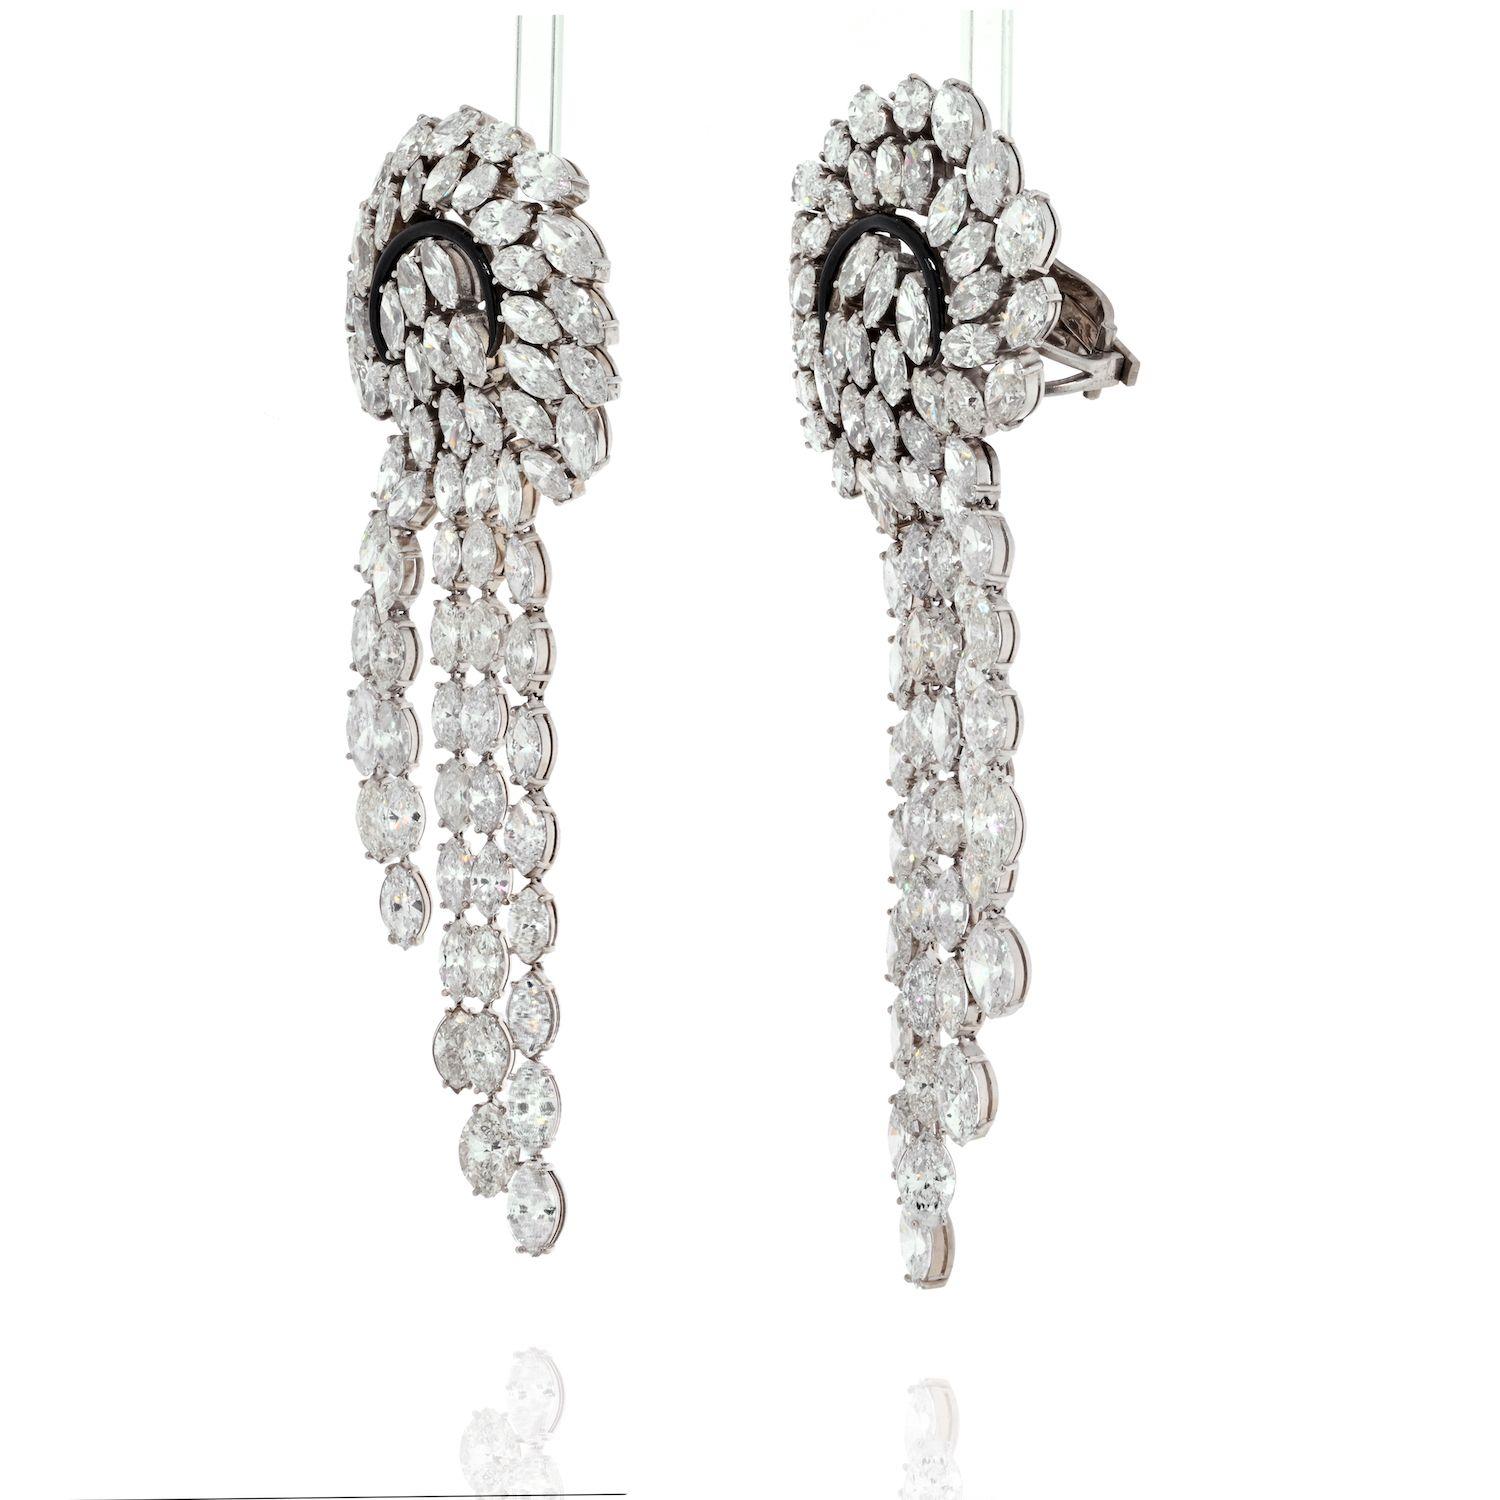 Composed of cascading lines of marquise cut diamonds, accented by black enamel swirl these fabolous earrings are made for a diva. Over 50 carats in marquise cut diamonds will certainly deliver the attention you crave. The earrings are mounting in